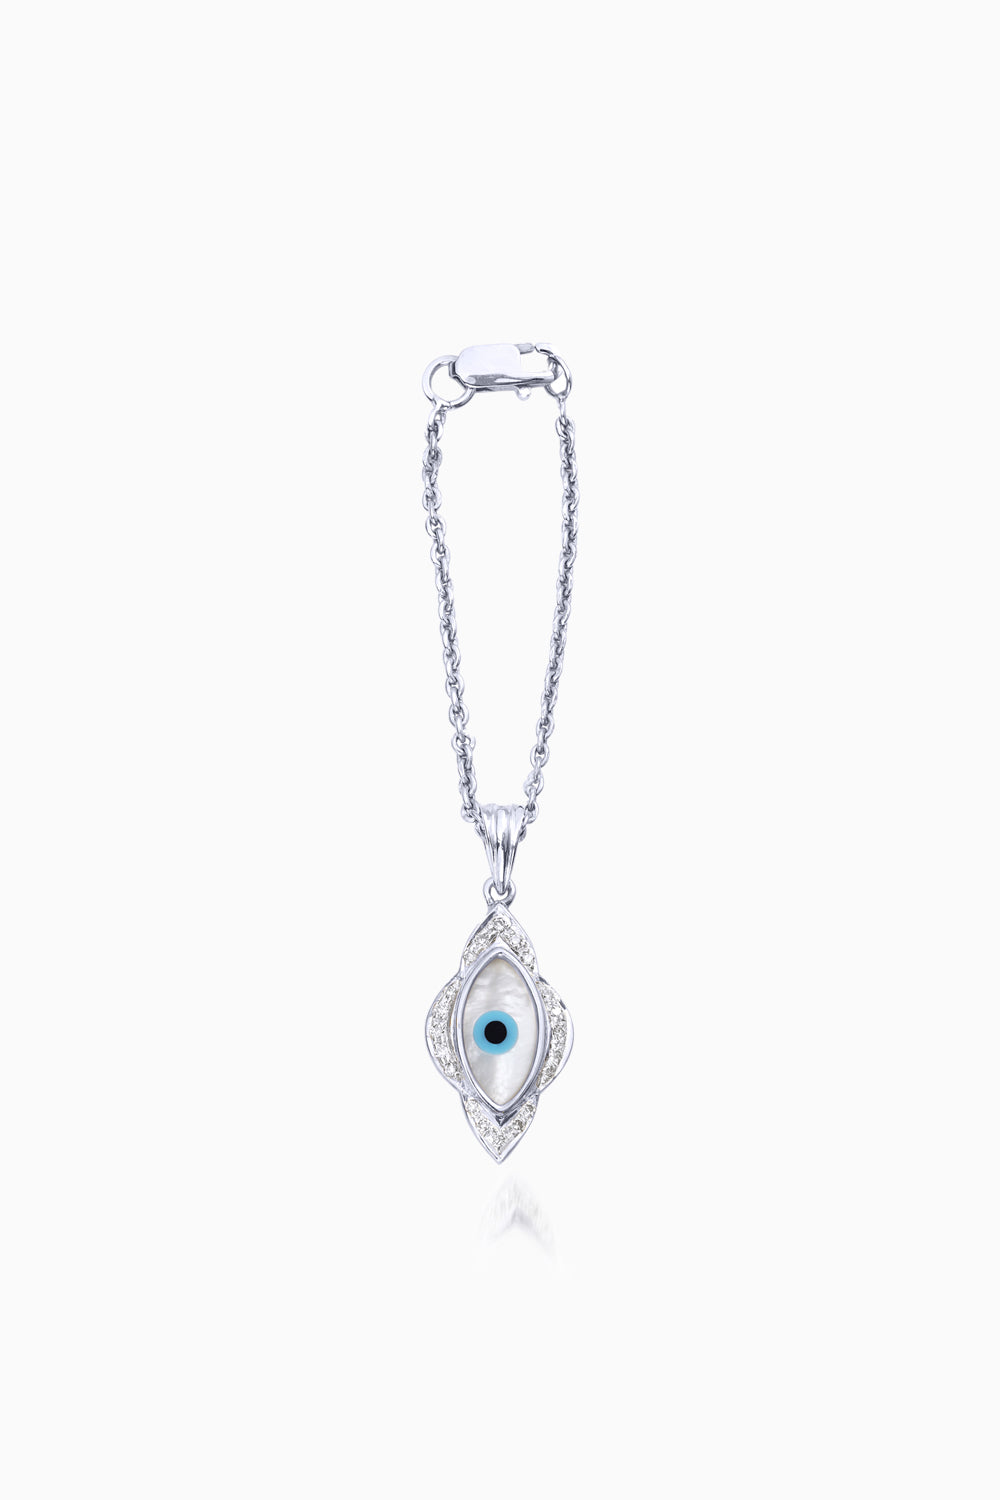 Small Marquise Evil Eye Diamond Chain Watch 14KT Gold Charm